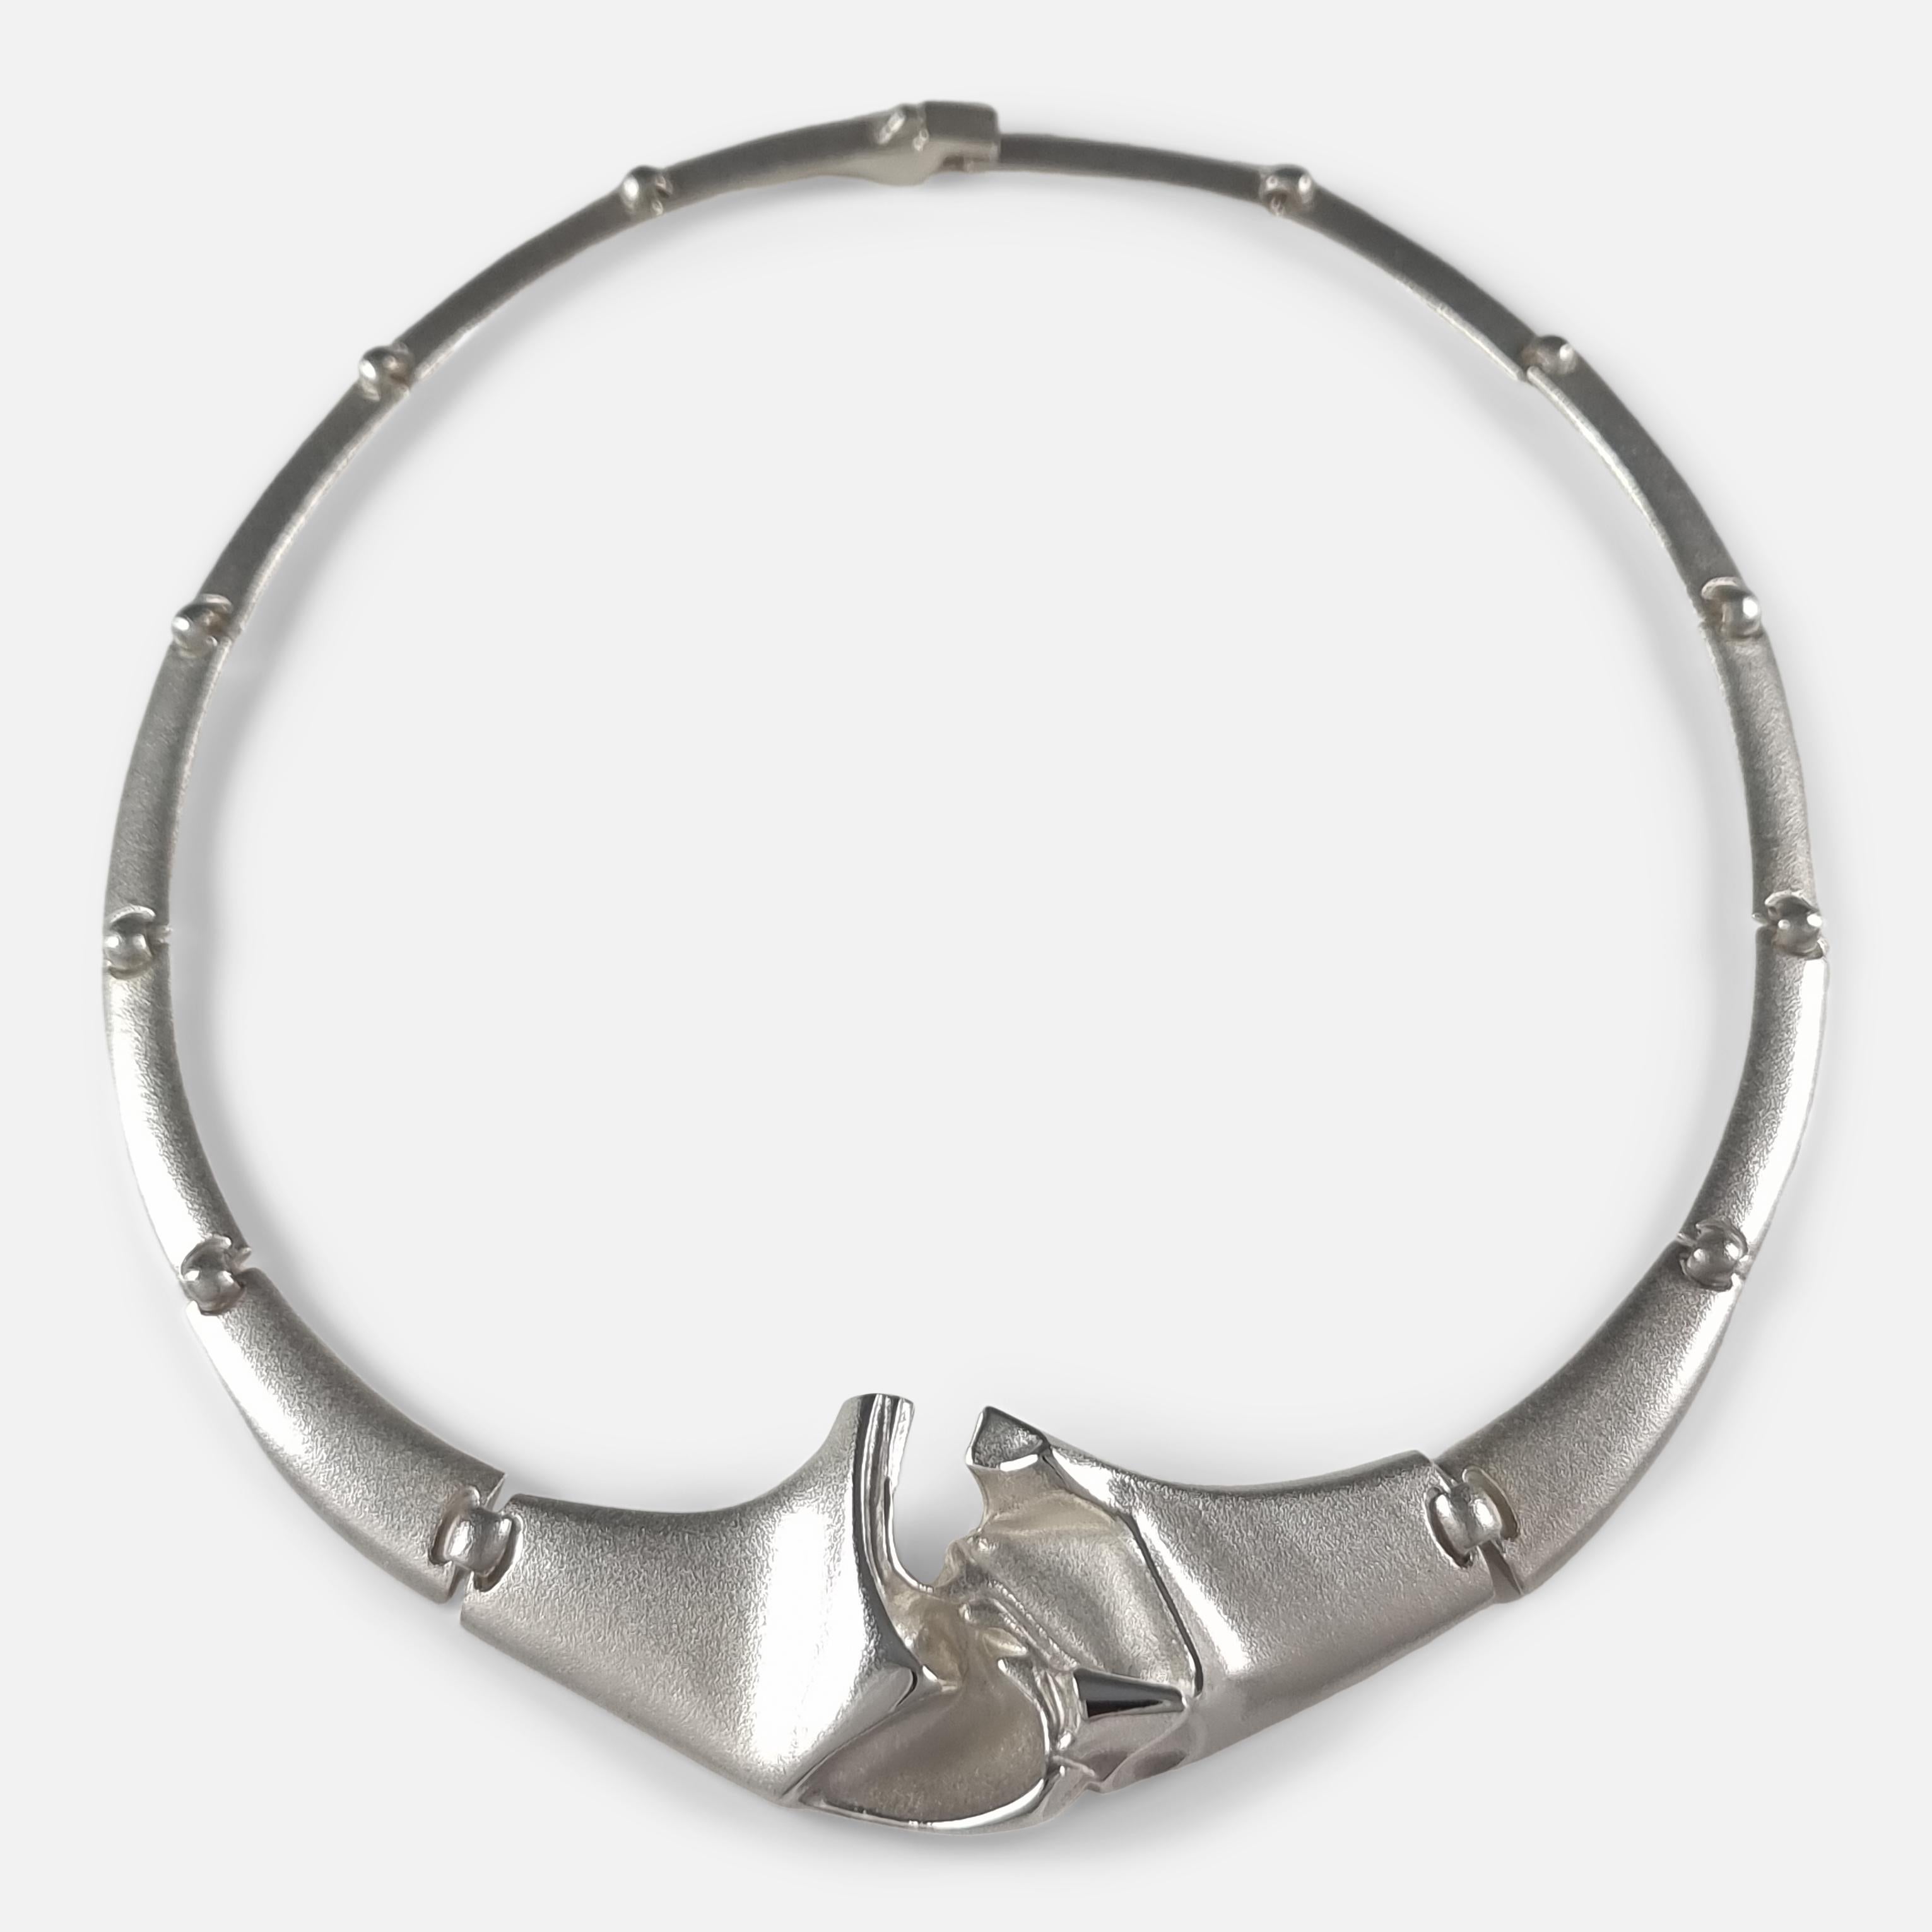 A sterling silver necklace designed by Björn Weckström for Lapponia.

Hallmarked with the Lapponia makers mark, Common Control Mark '925' to denote sterling silver, Finnish nation mark, and date code is rubbed.

Period: - Late 20th Century.

Maker: